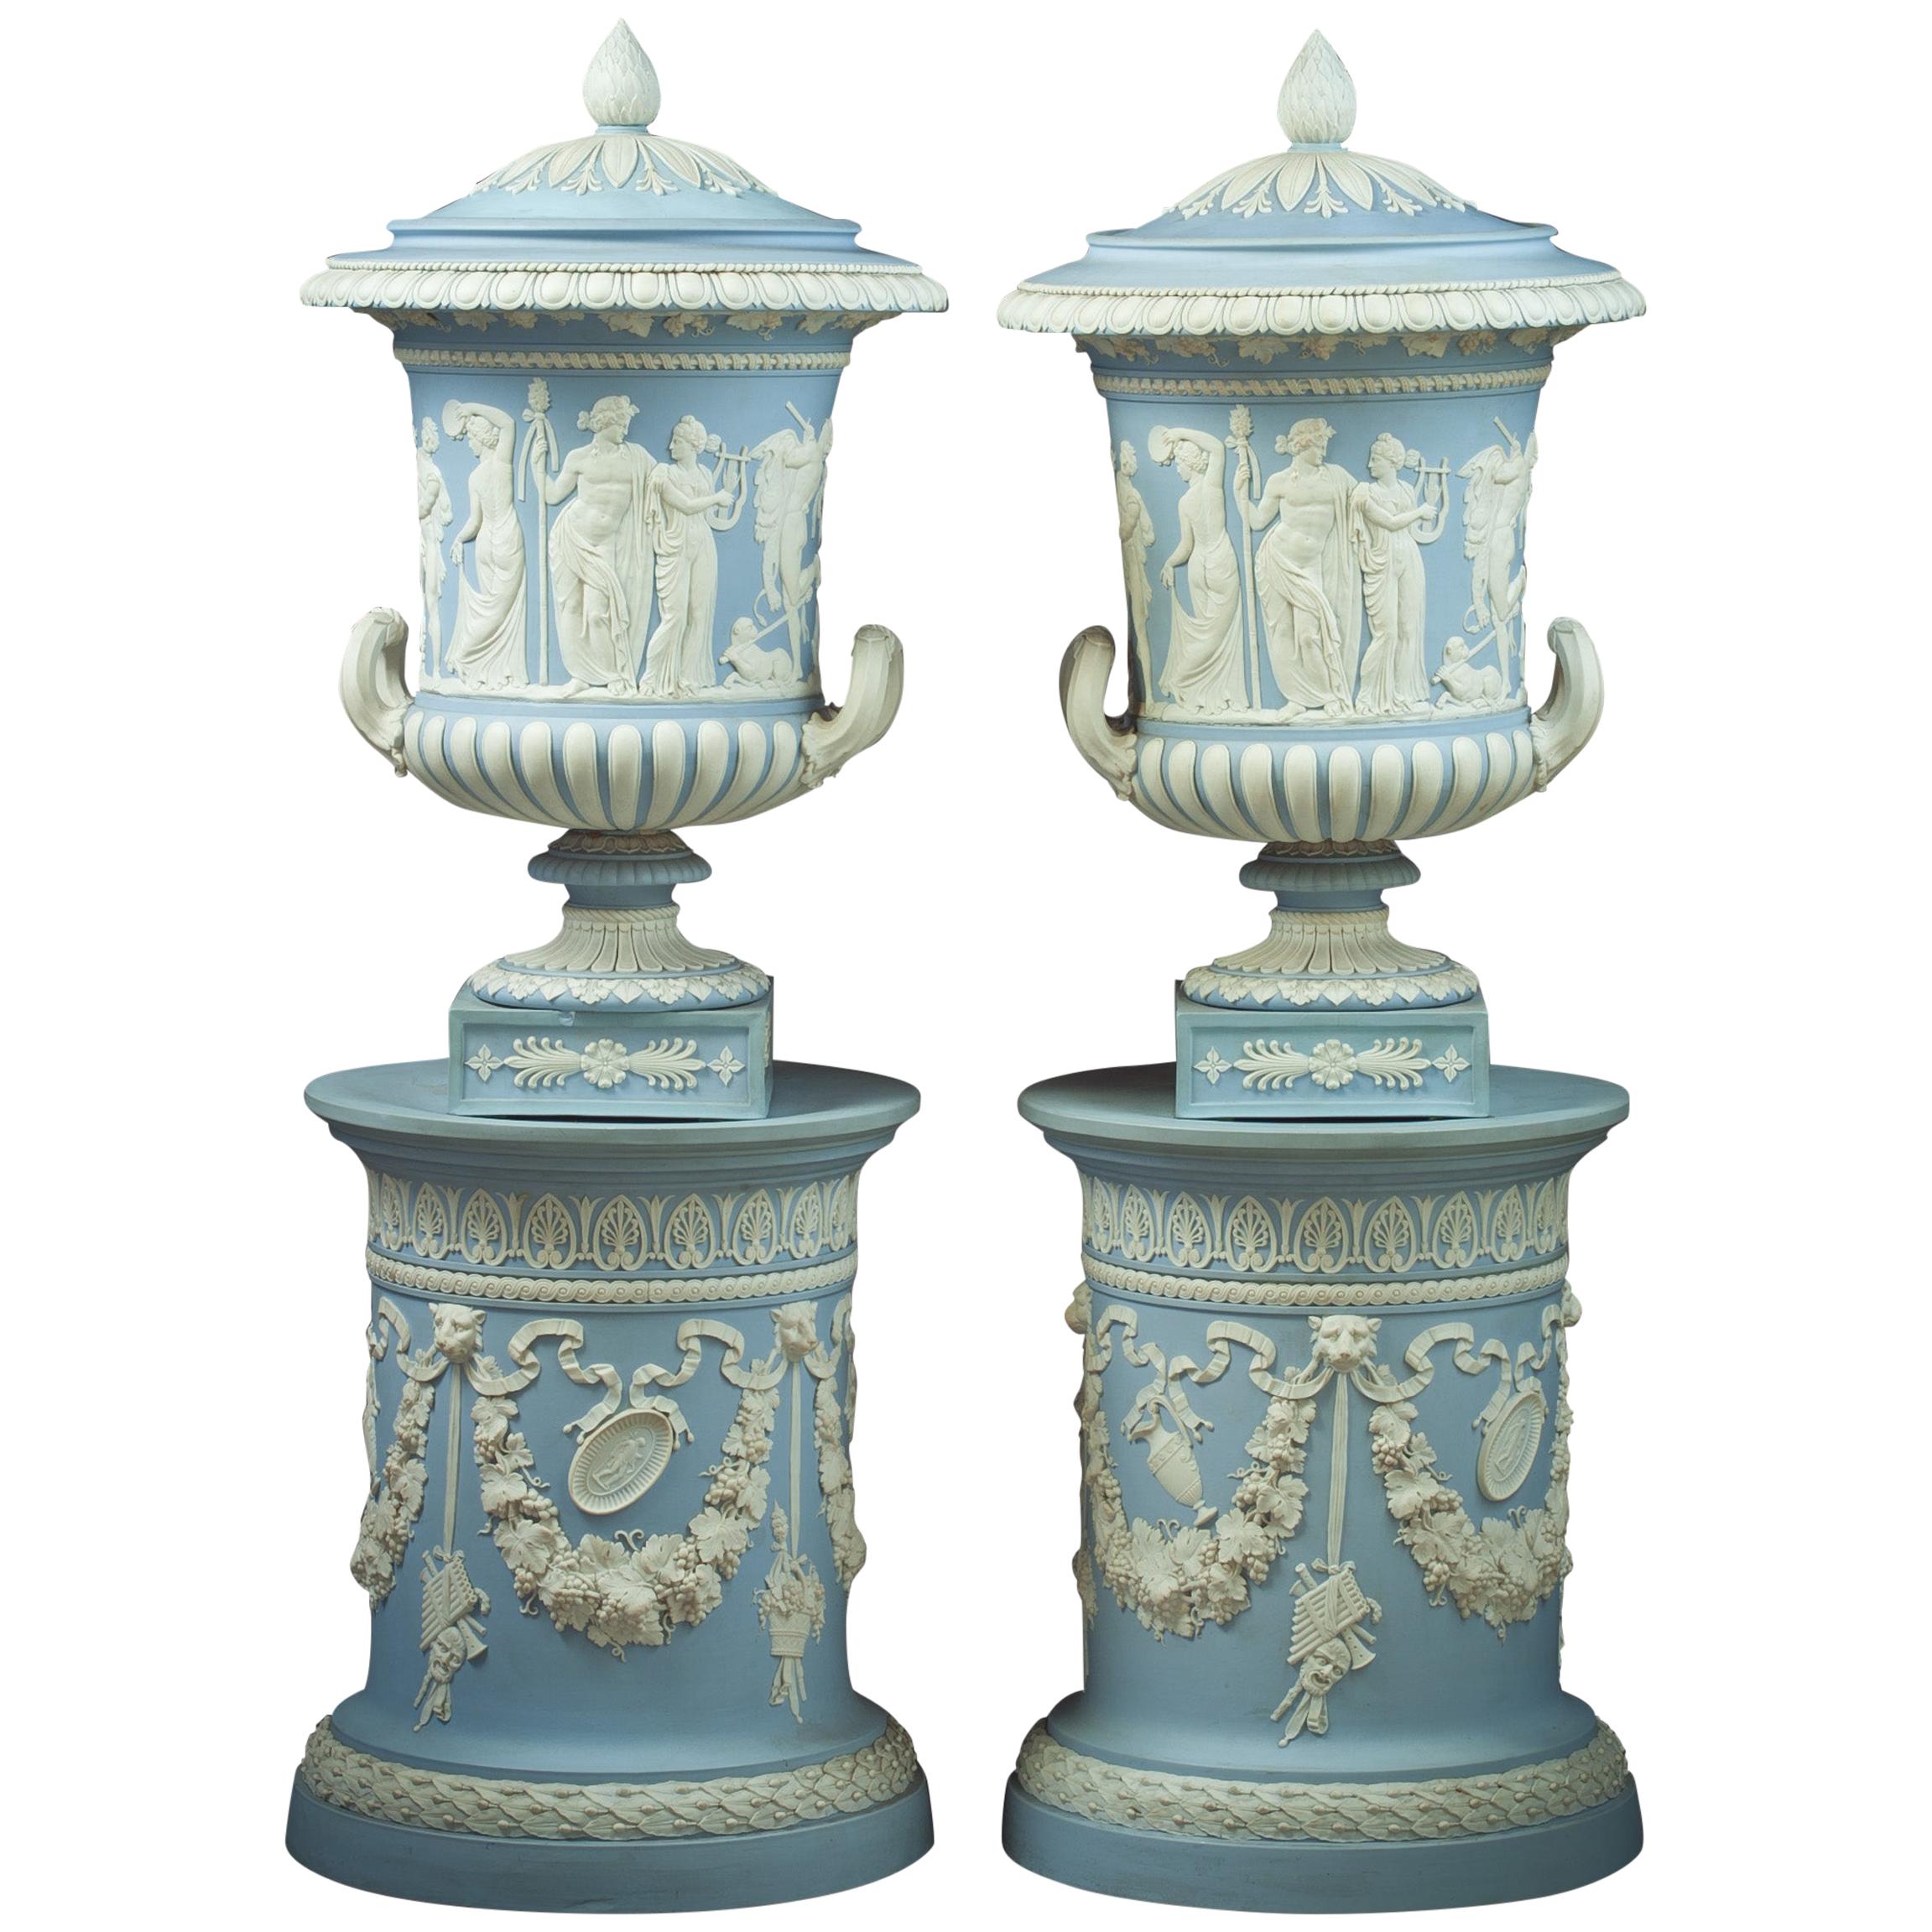 Pair of Wedgwood Borghese Covered Vases, circa 1840